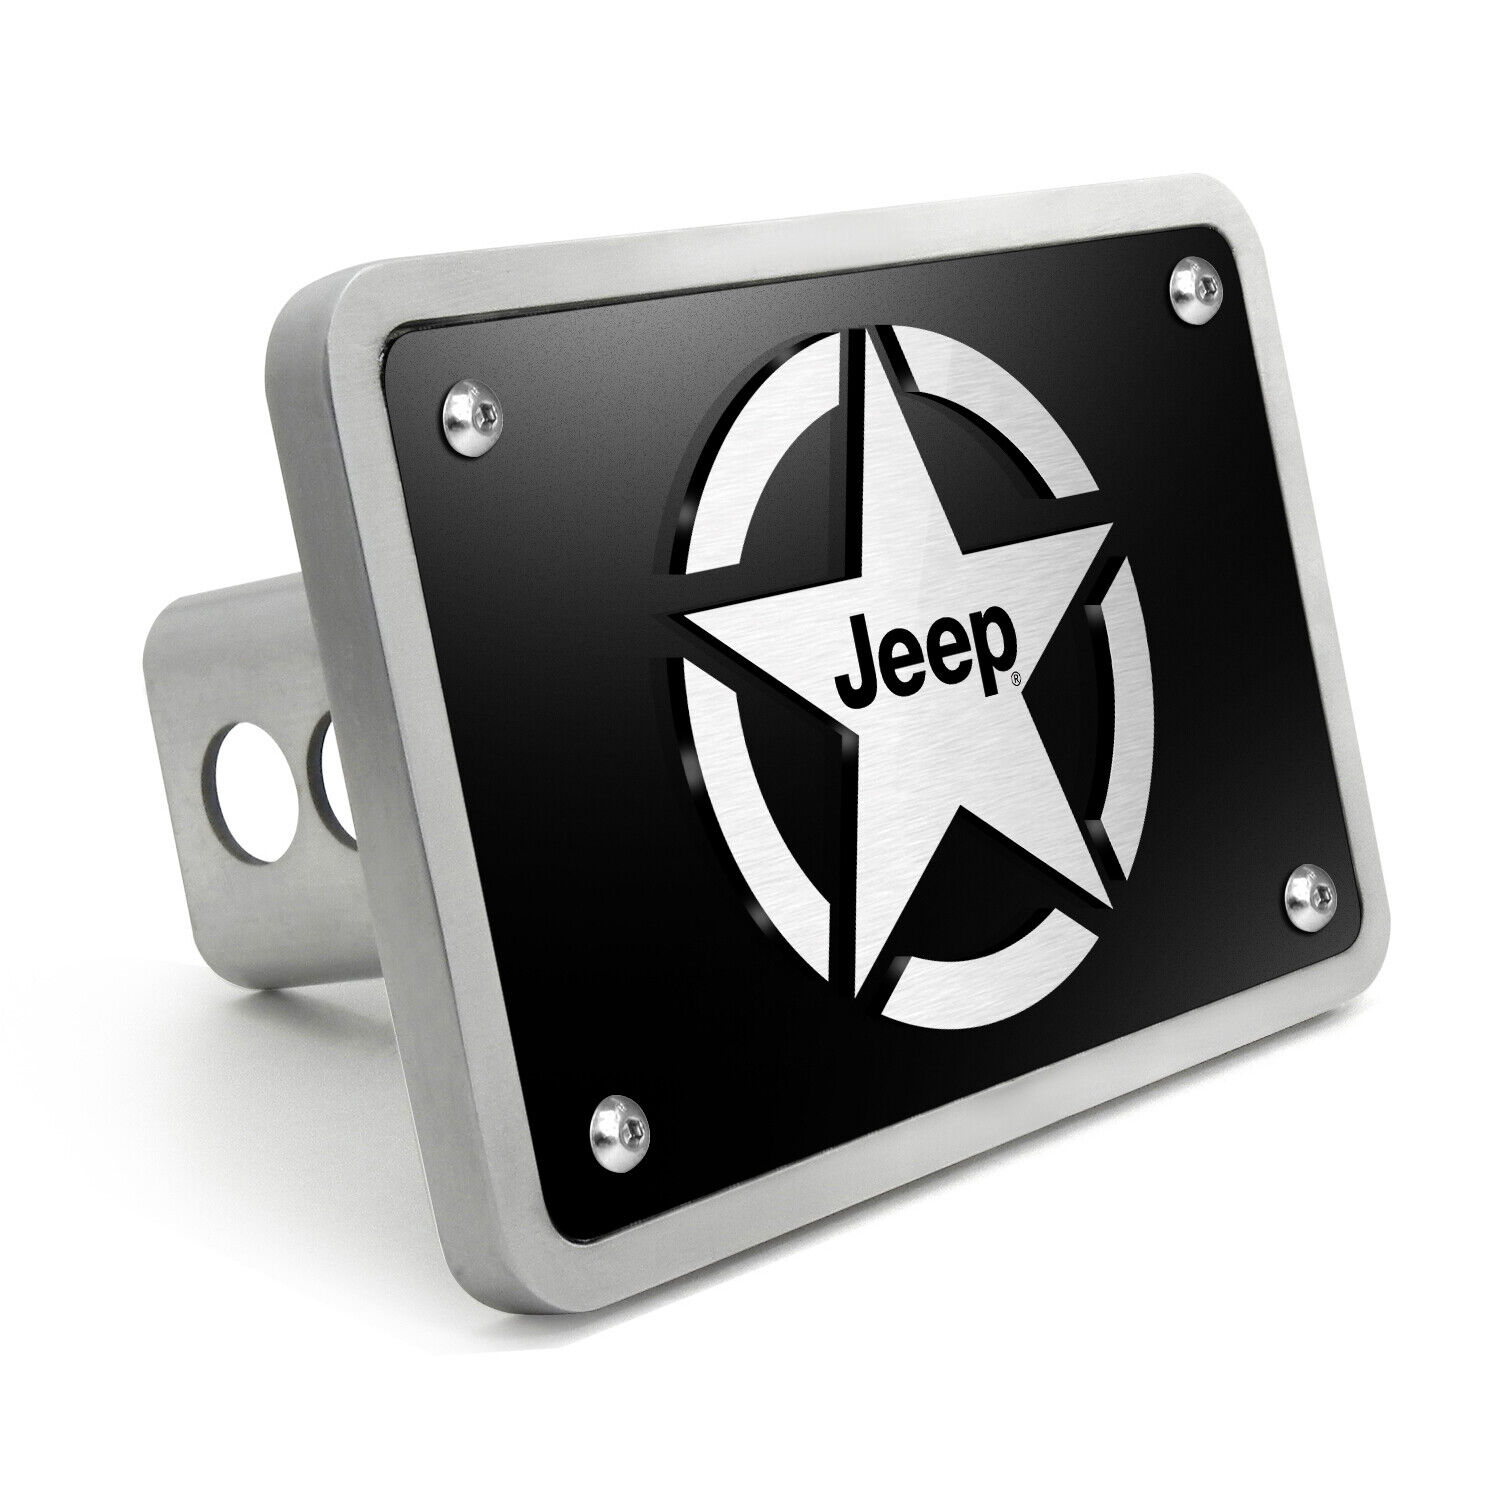 Jeep Willys Star in 3D on Black Billet Aluminum 2-inch Tow Hitch Cover